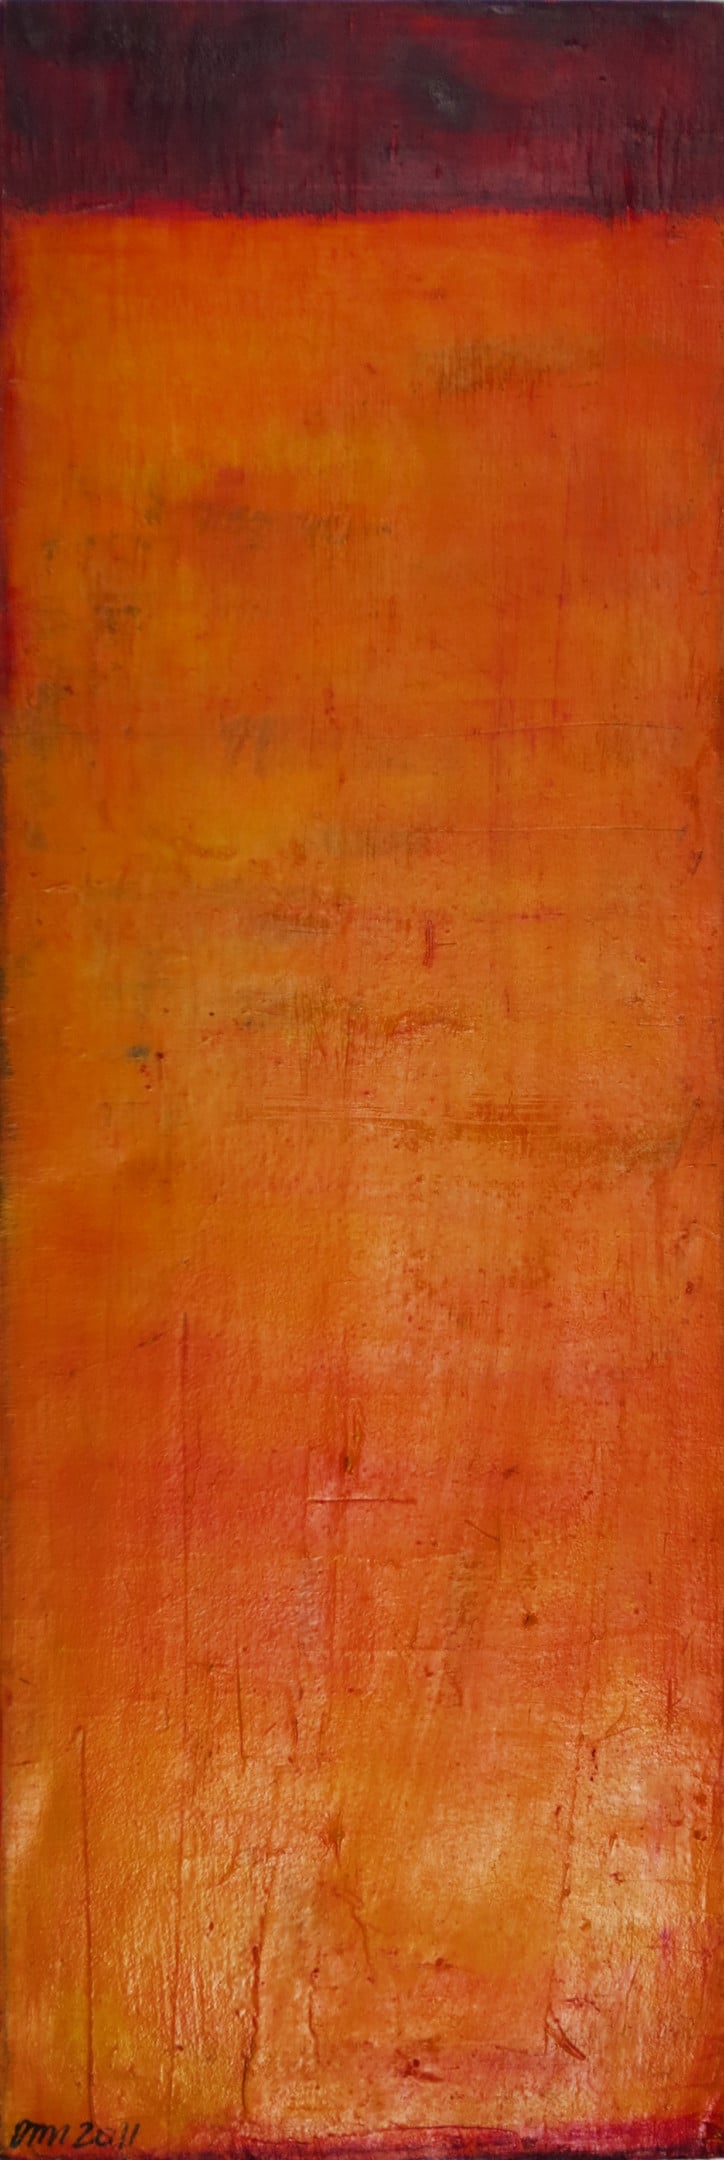 "Red Earth" by Donna North NZ Artist